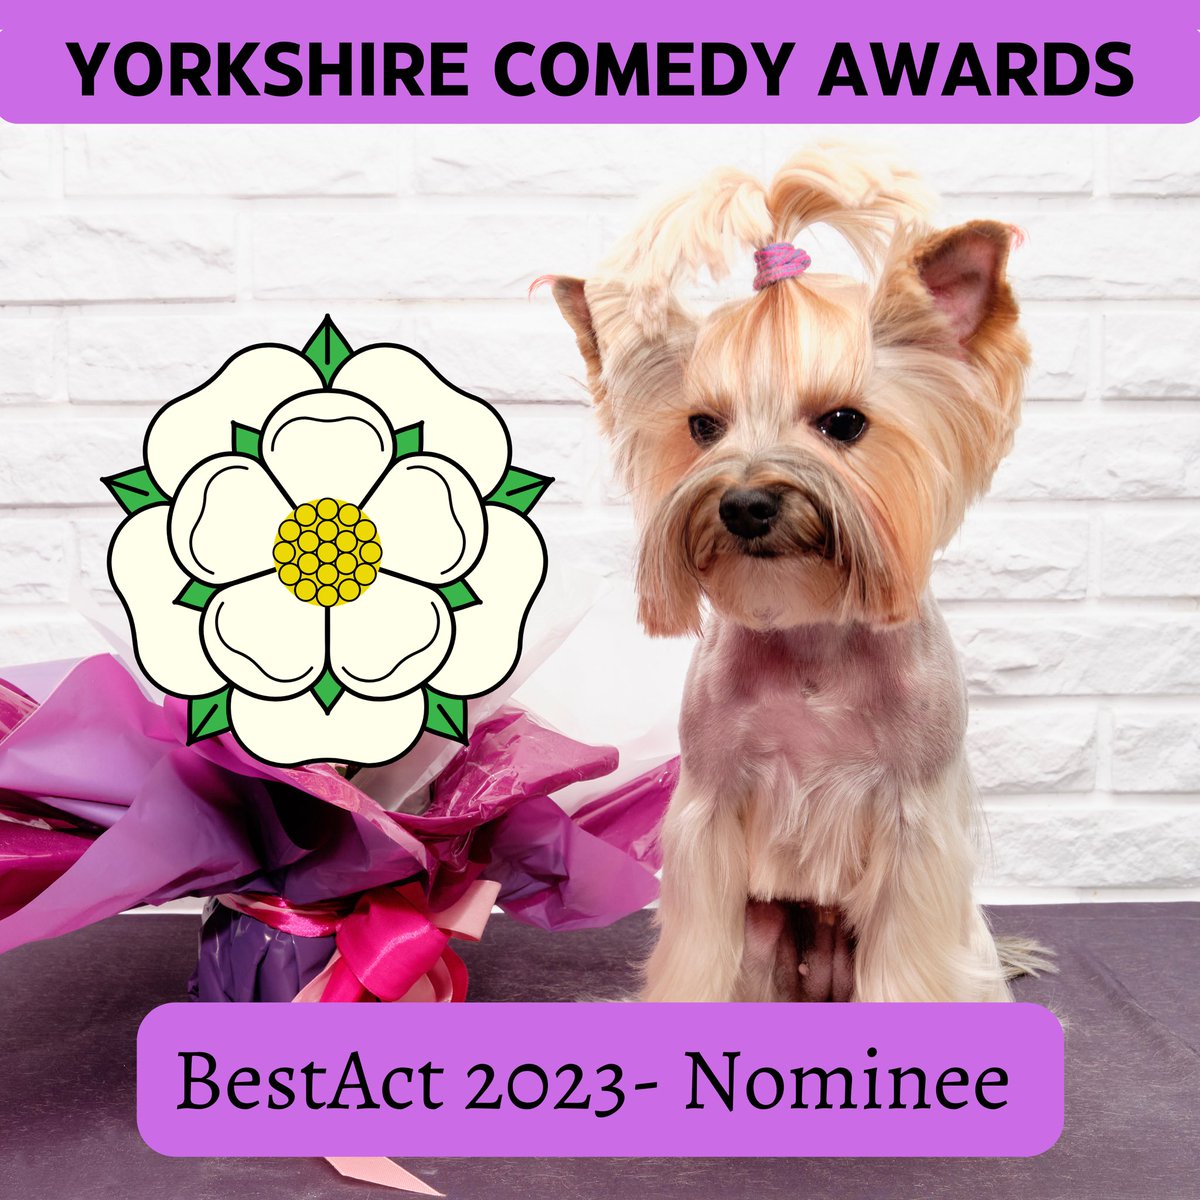 I am very flattered to have been nominated in the Best Act category of the Yorkshire Comedy Awards.

Fingers crossed that I can get a prize.

#comedyawards #standupcomedy #fillyerboots  #edfringe #yorkshirecomedyawards #roadcomedian